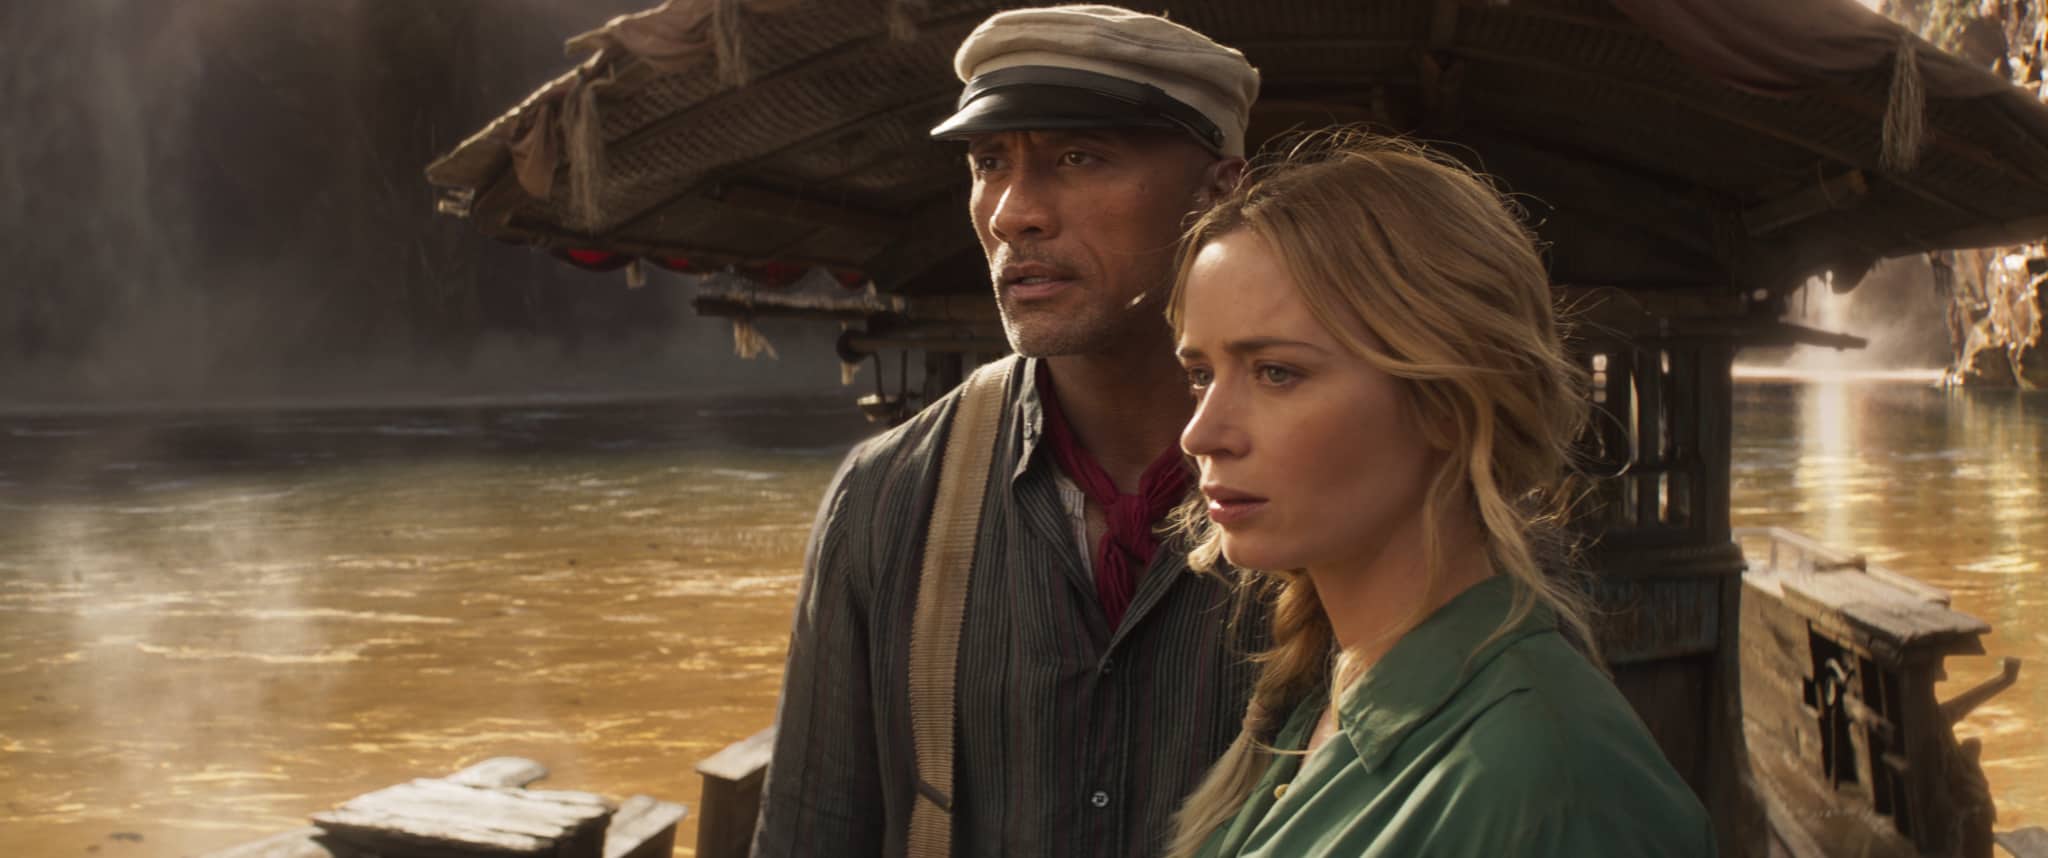 Dwayne Johnson as Frank and Emily Blunt as Lily in JUNGLE  Cruise Premiere date